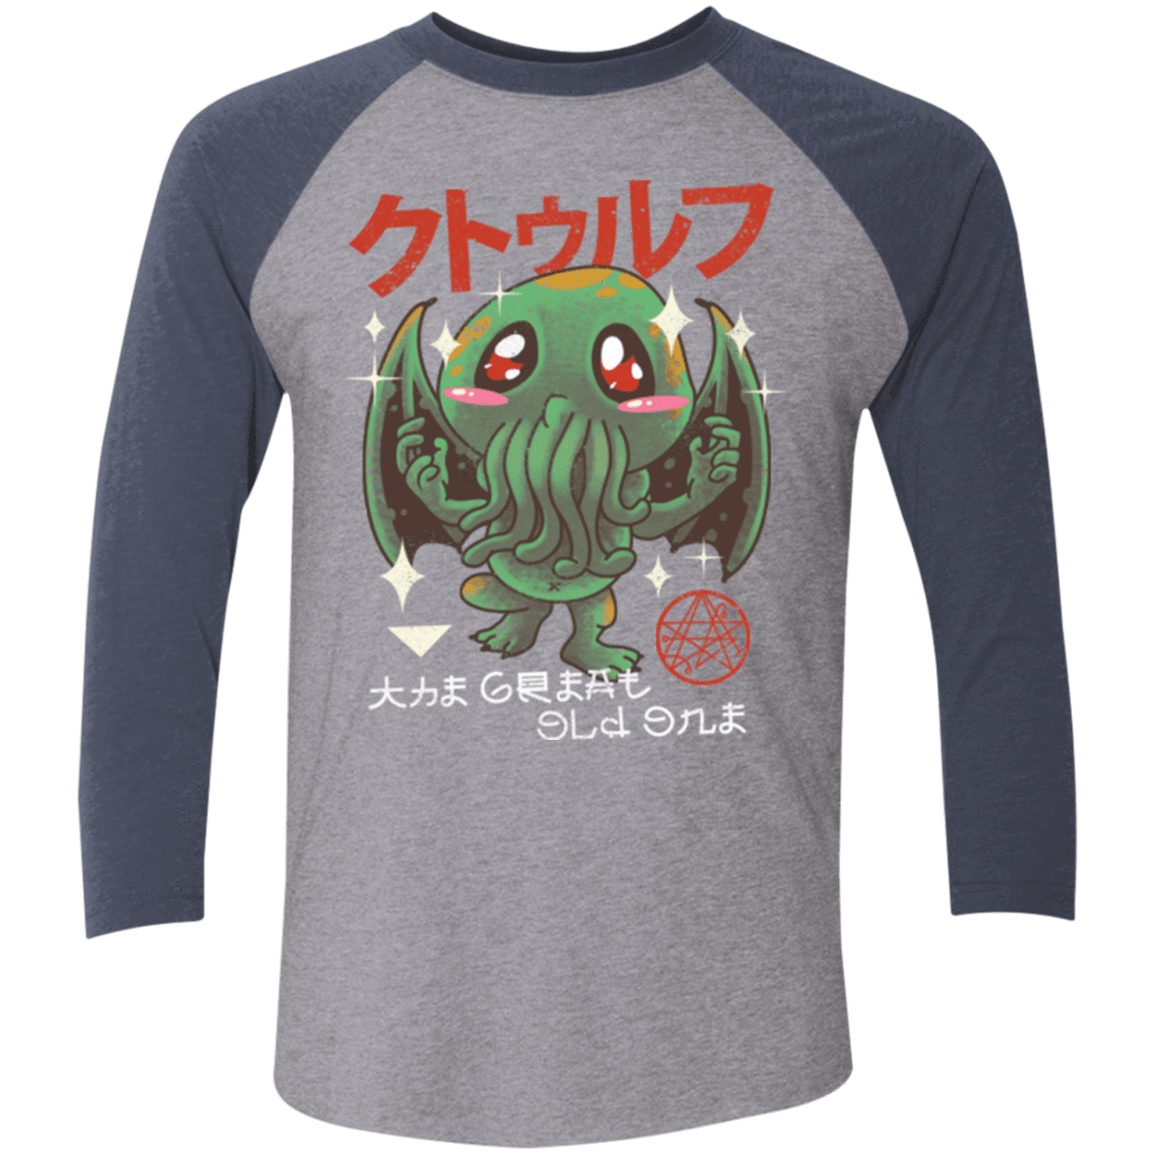 T-Shirts Premium Heather/ Vintage Navy / X-Small The Great Old Kawaii Men's Triblend 3/4 Sleeve